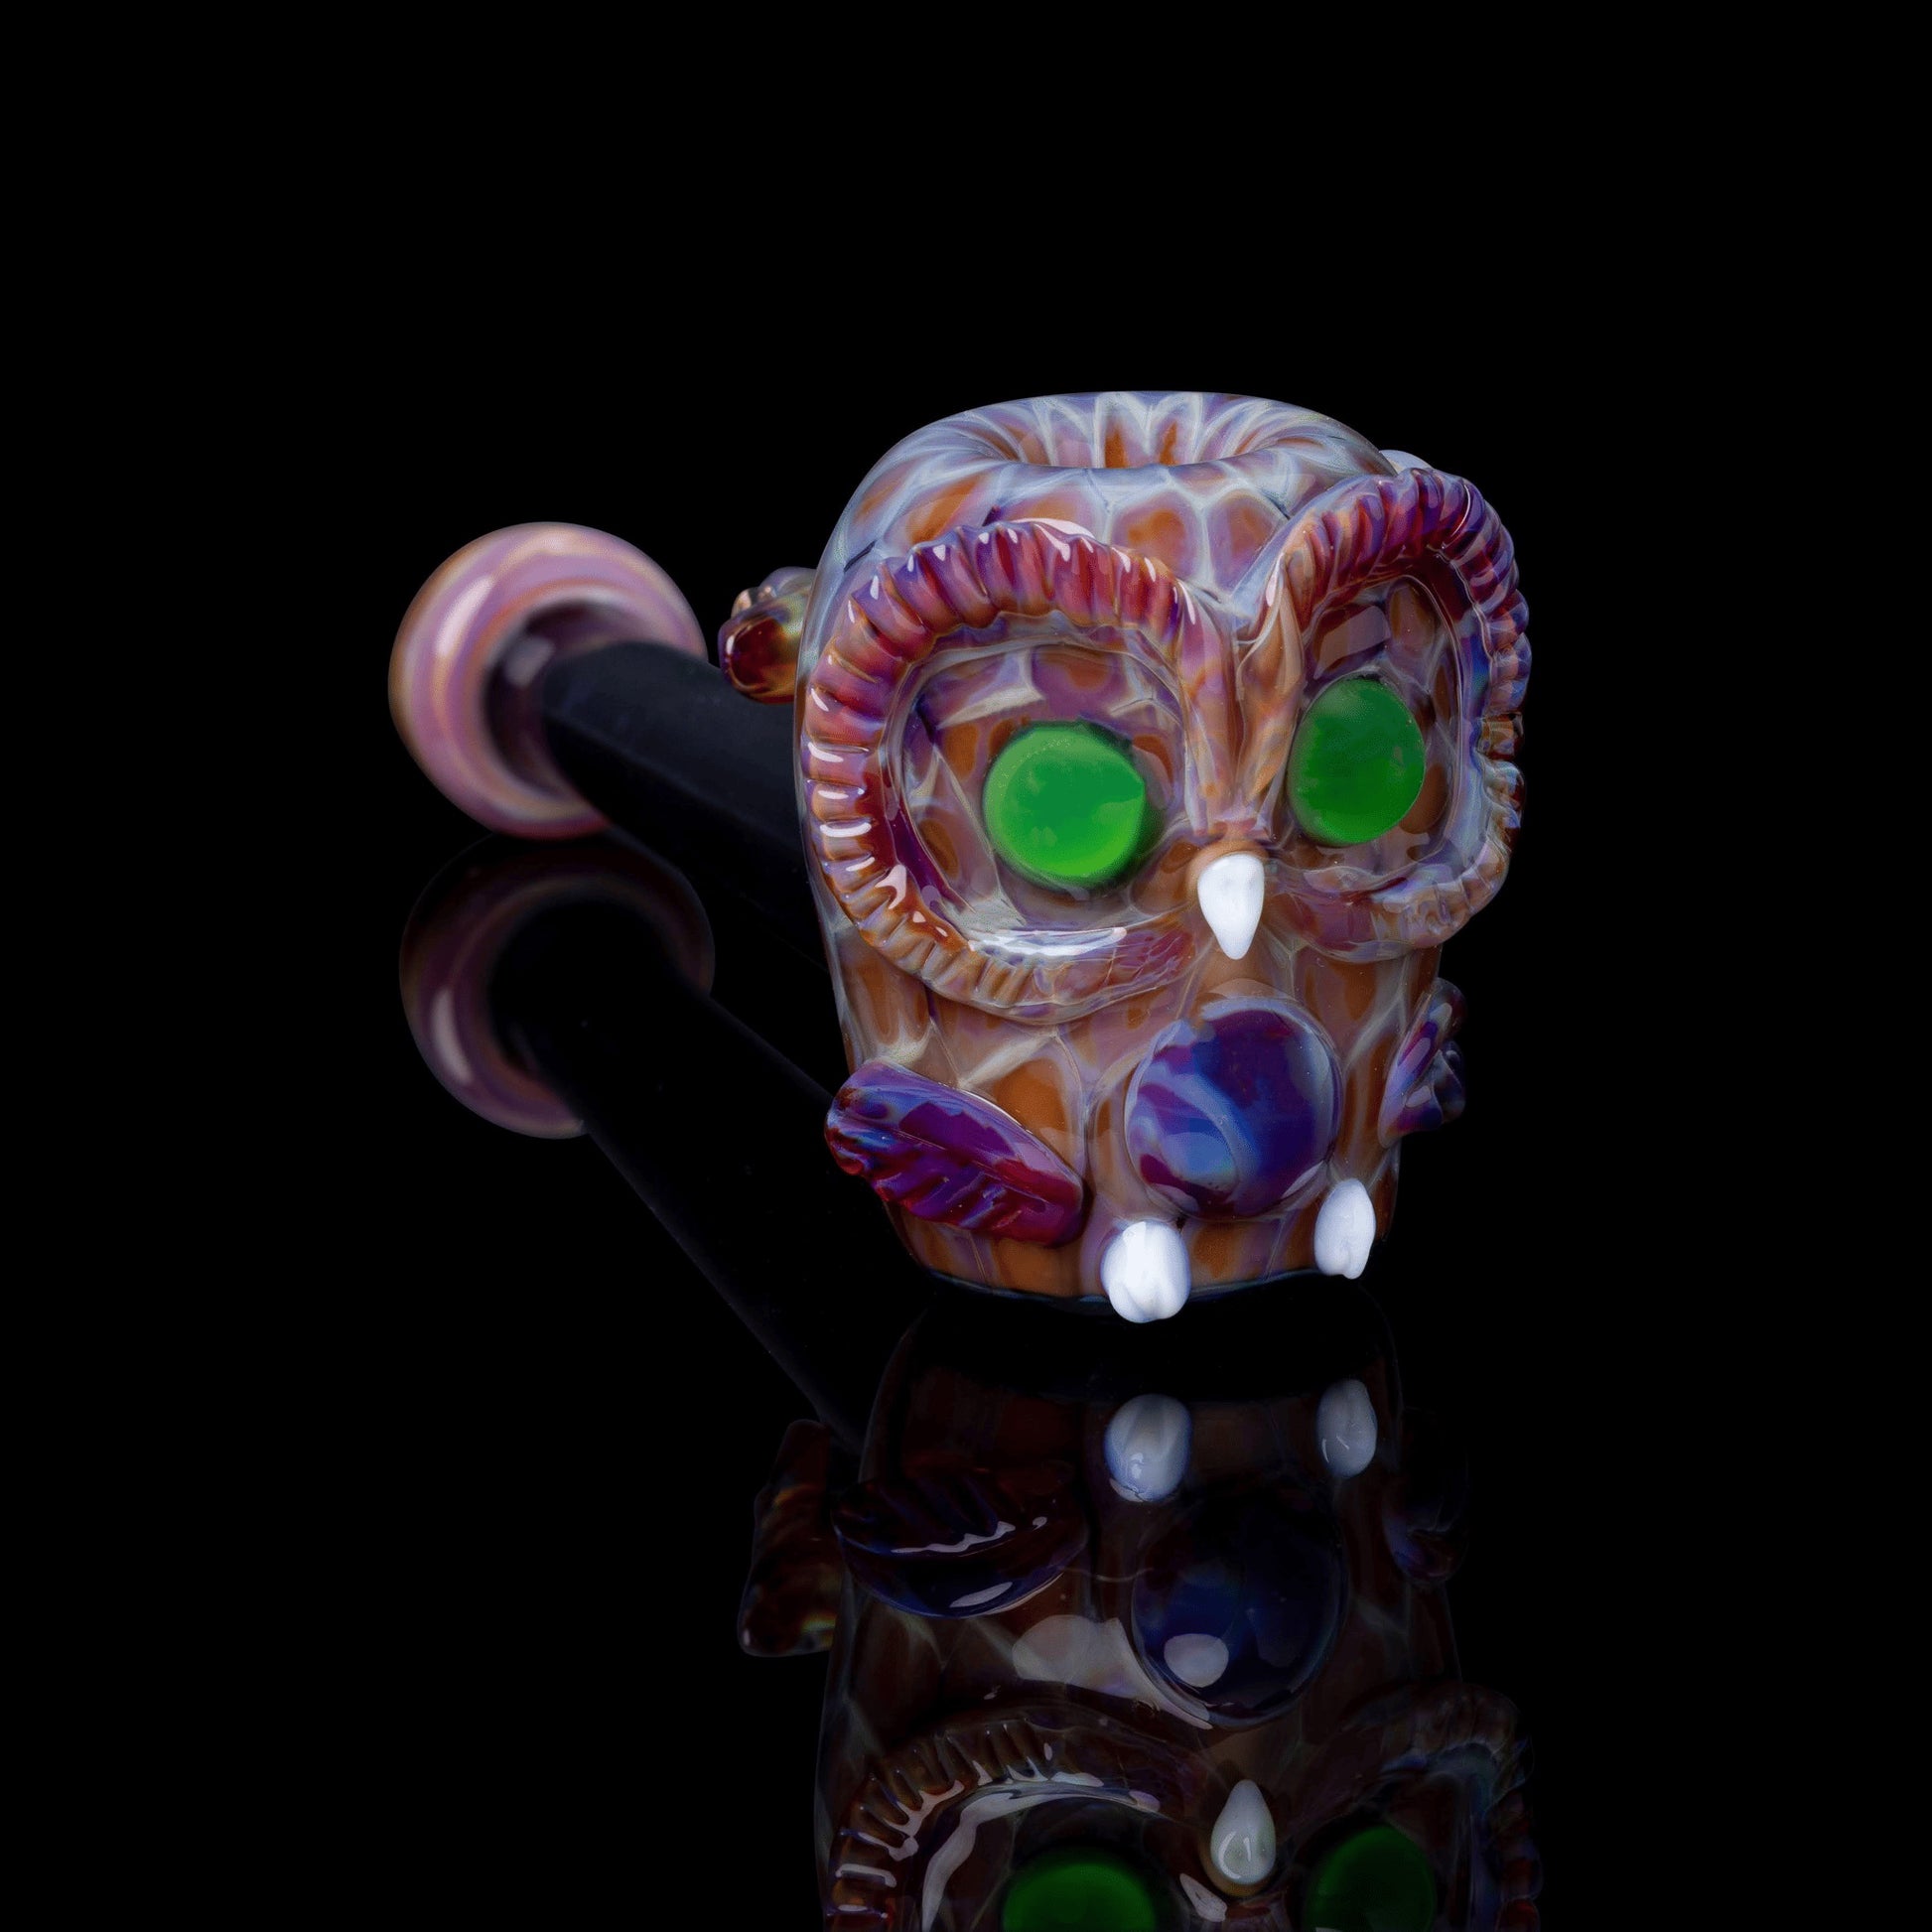 innovative design of the Owl Dry Pipe by Elks That Run x Nathan Belmont (Belmont's Beasts)